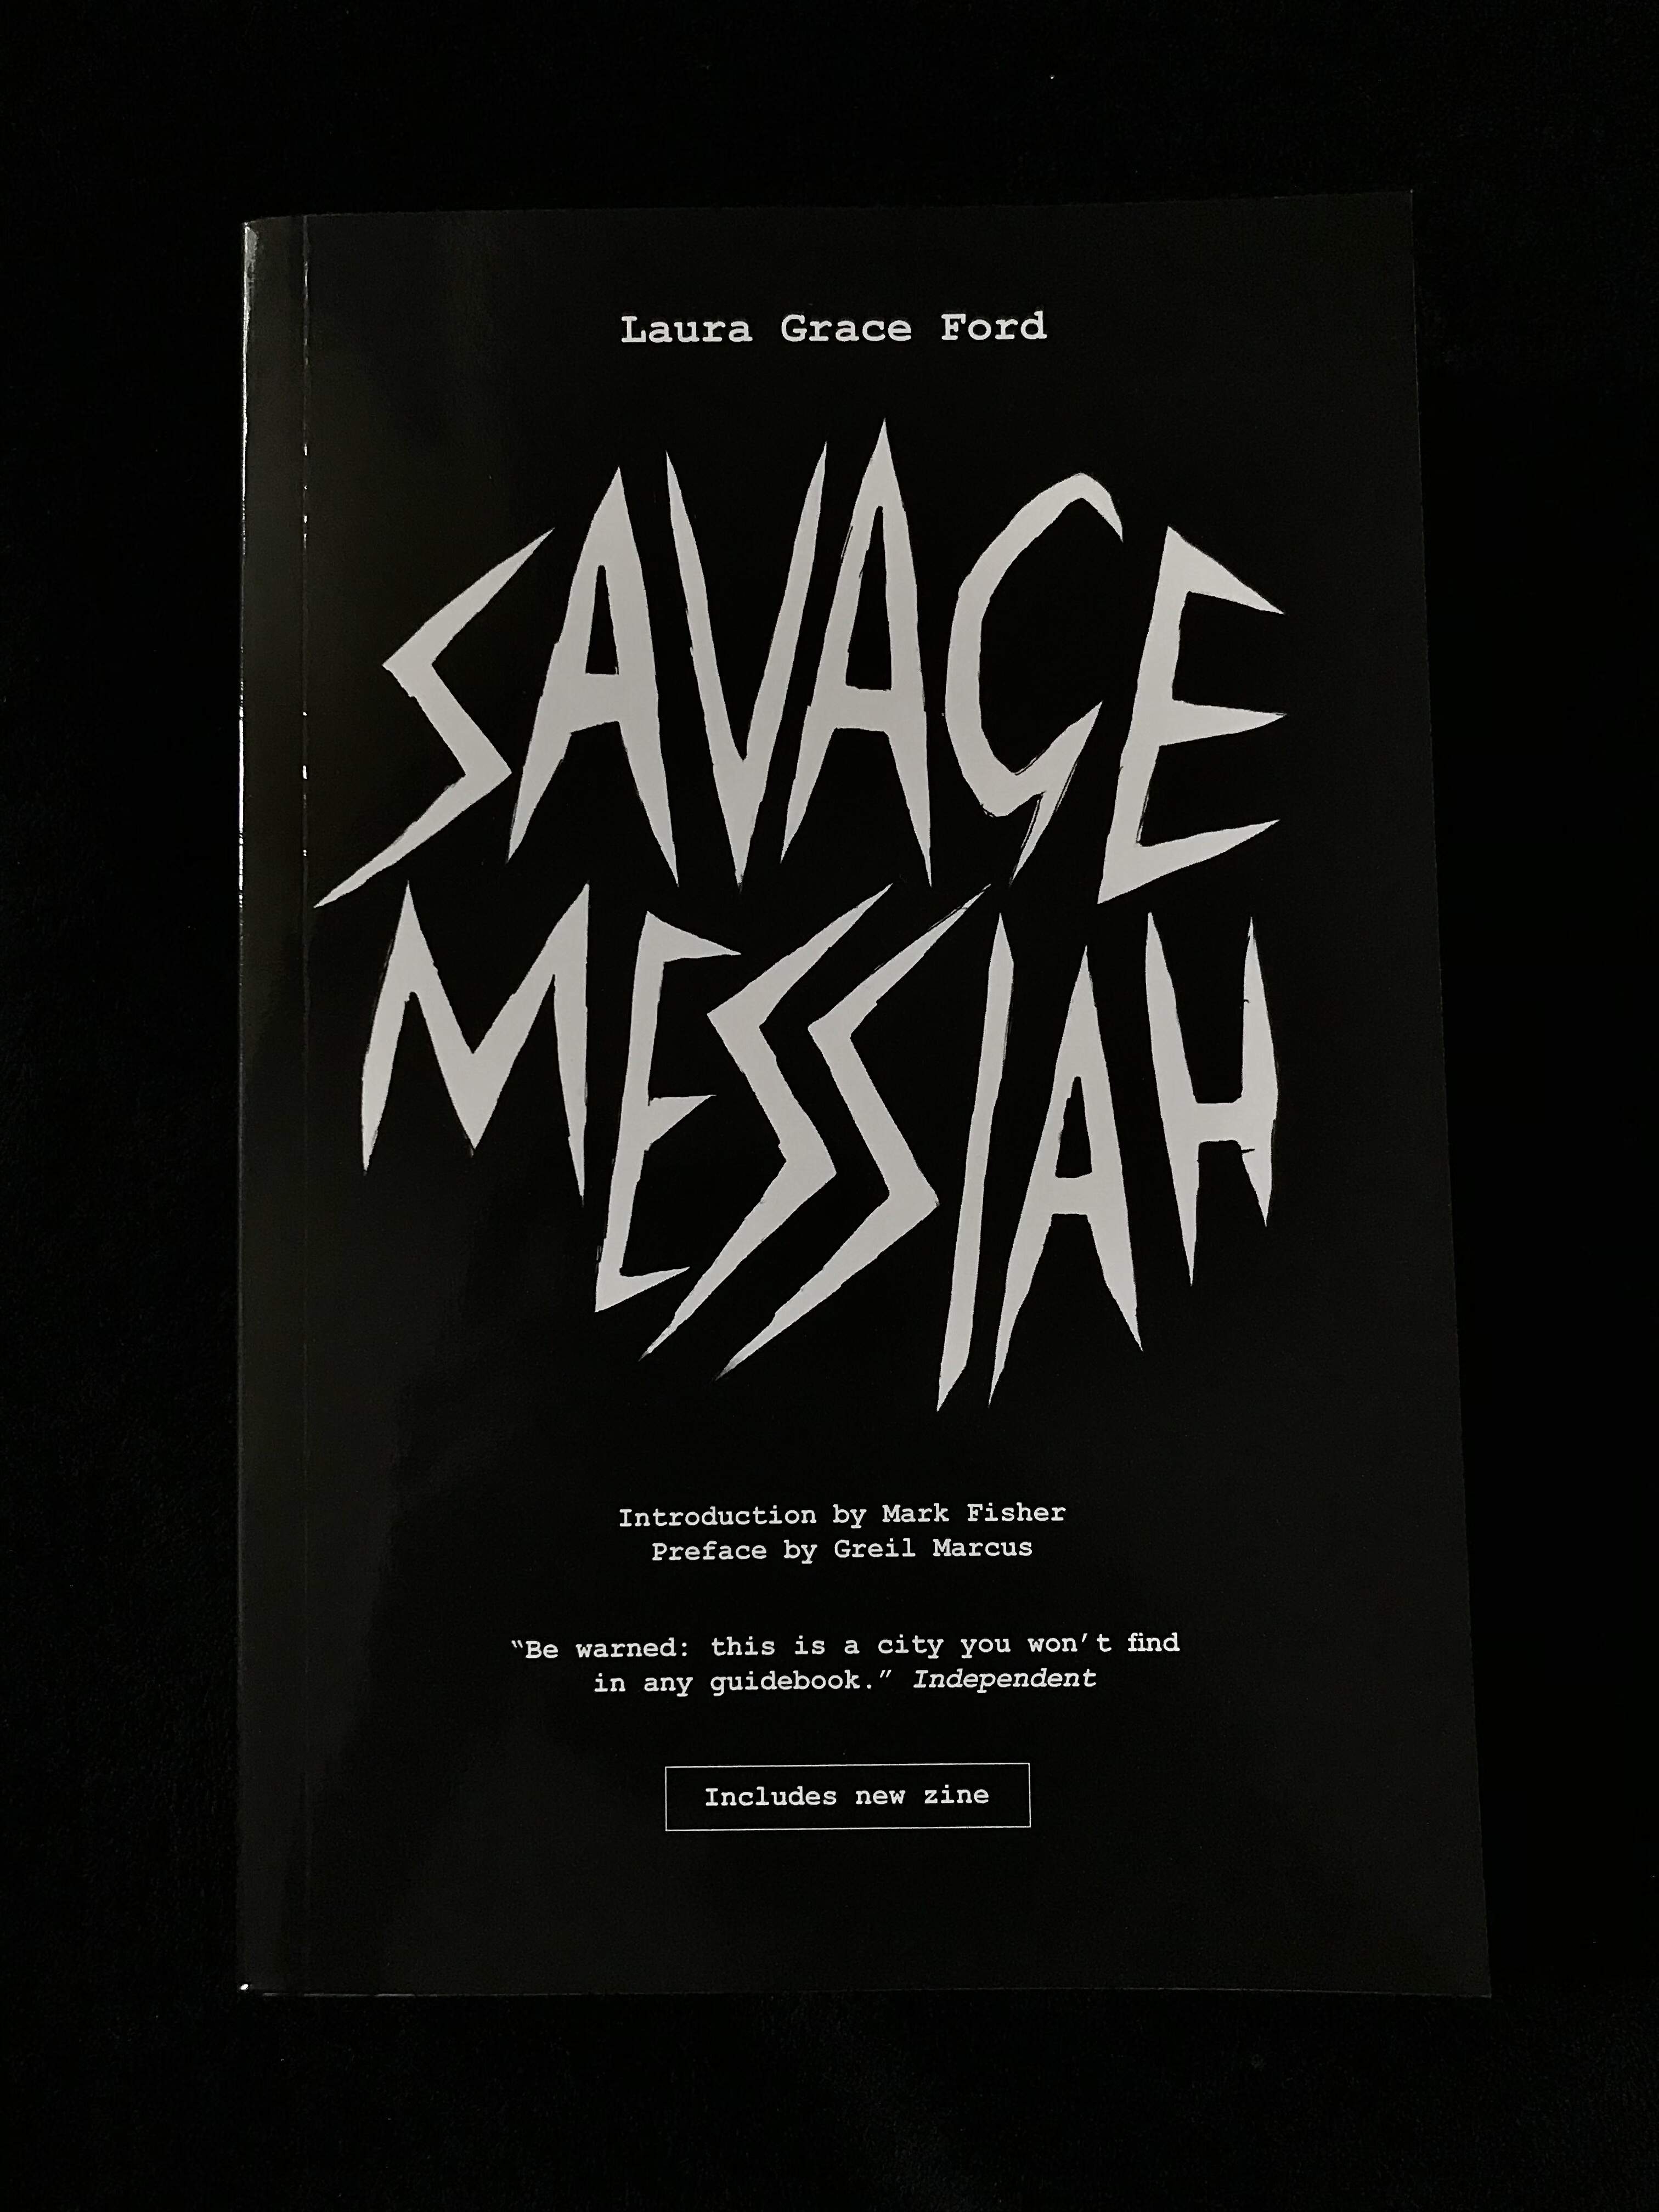 Savage Messiah by Laura Grace Ford